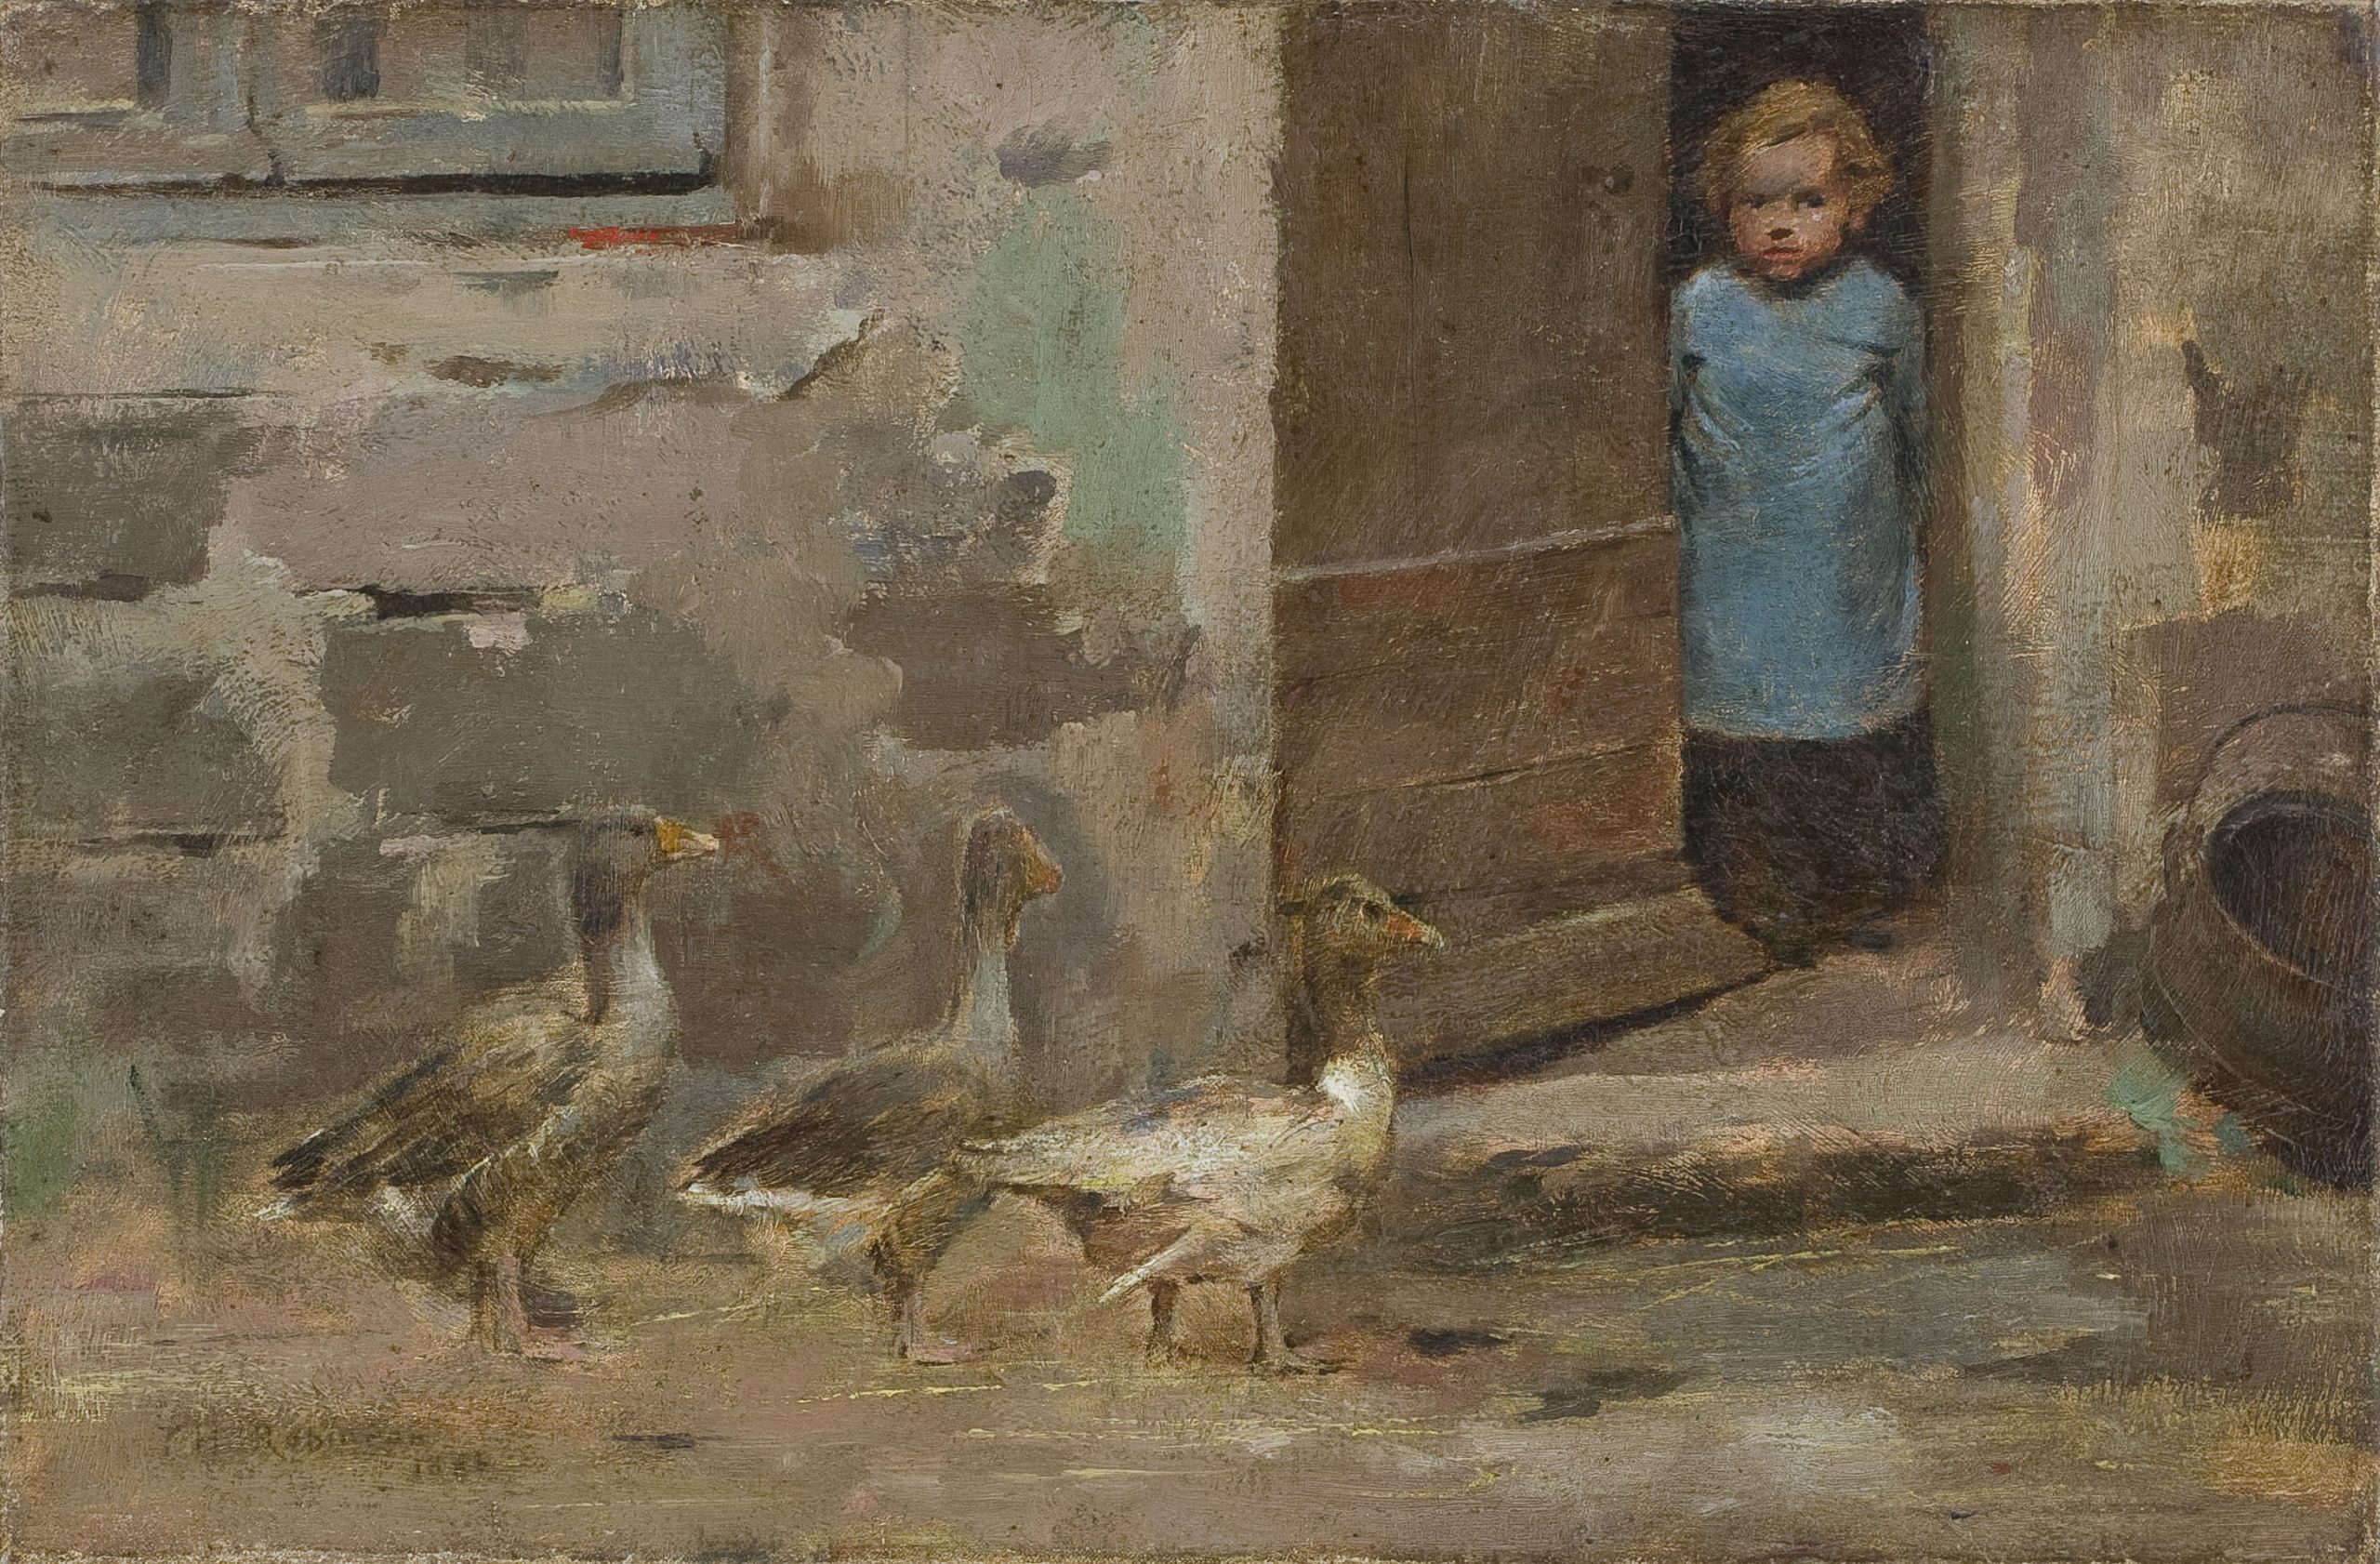 An oil painting depicts a young child in a blue tunic standing in a doorway of a stone building and looking out at three geese standing by a step in the foreground.